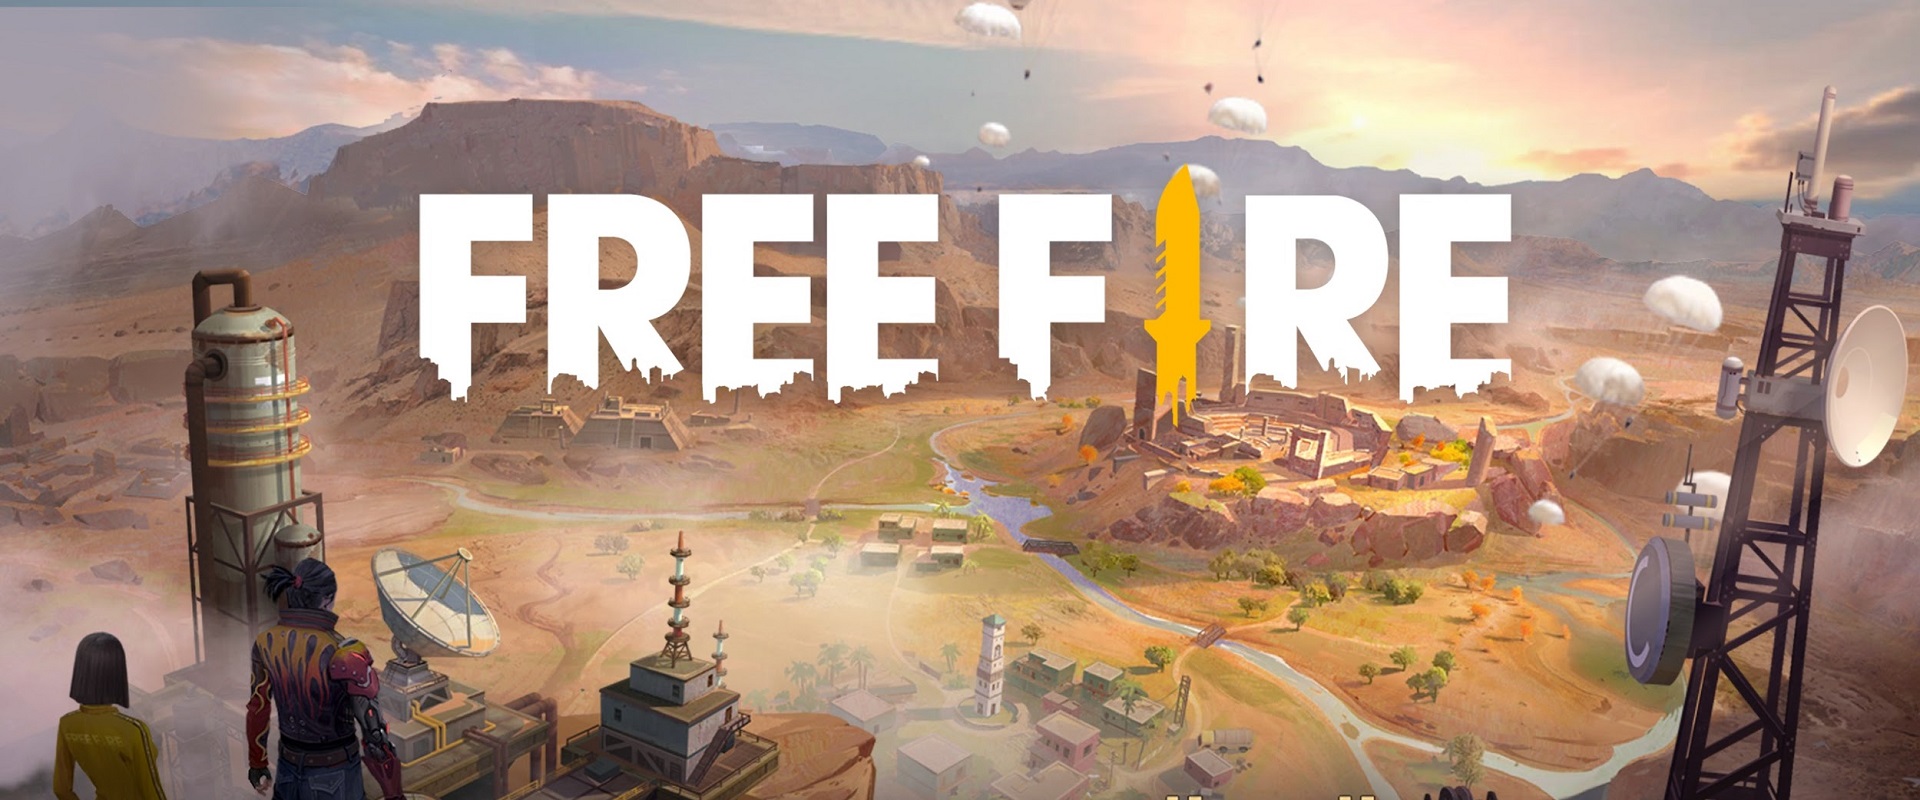 Download & Play Garena Free Fire - Rampage on PC & Mac with NoxPlayer (Emulator)